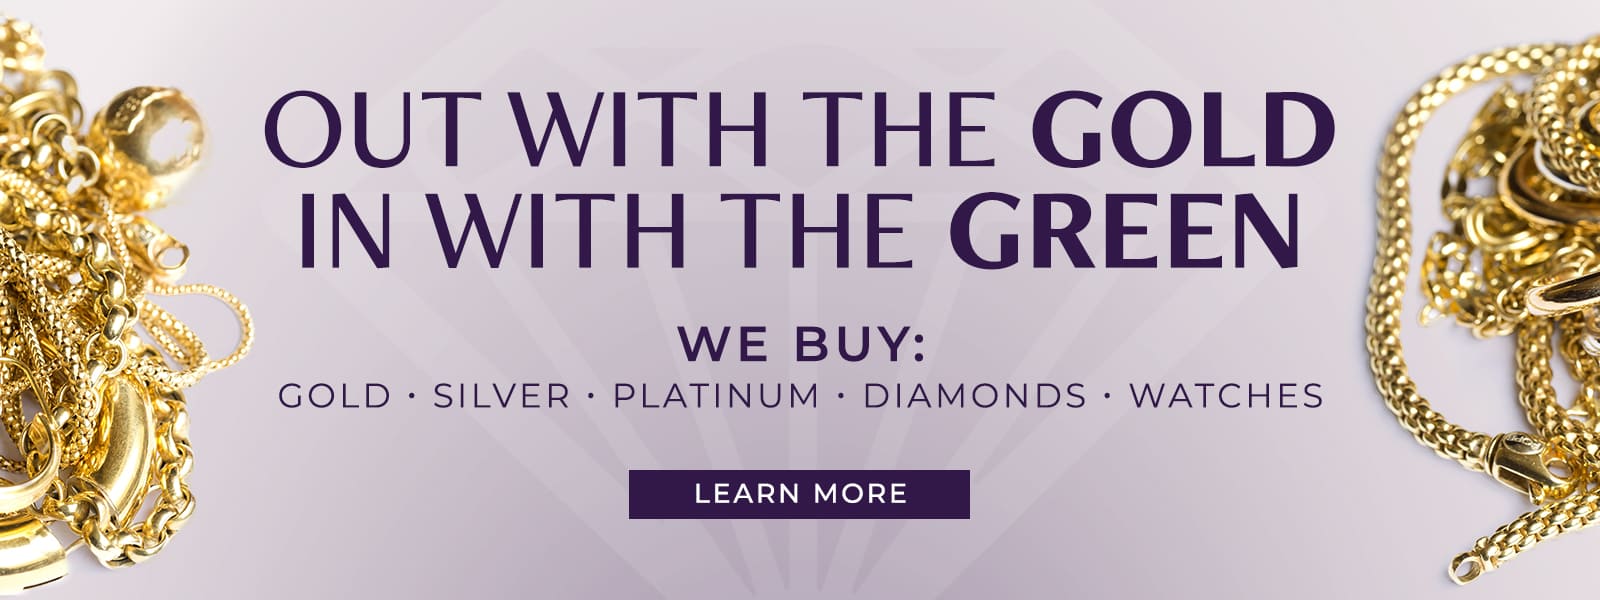 Gemstone, Watch, and Precious Metal Buying at EM Smith Family Jewelers